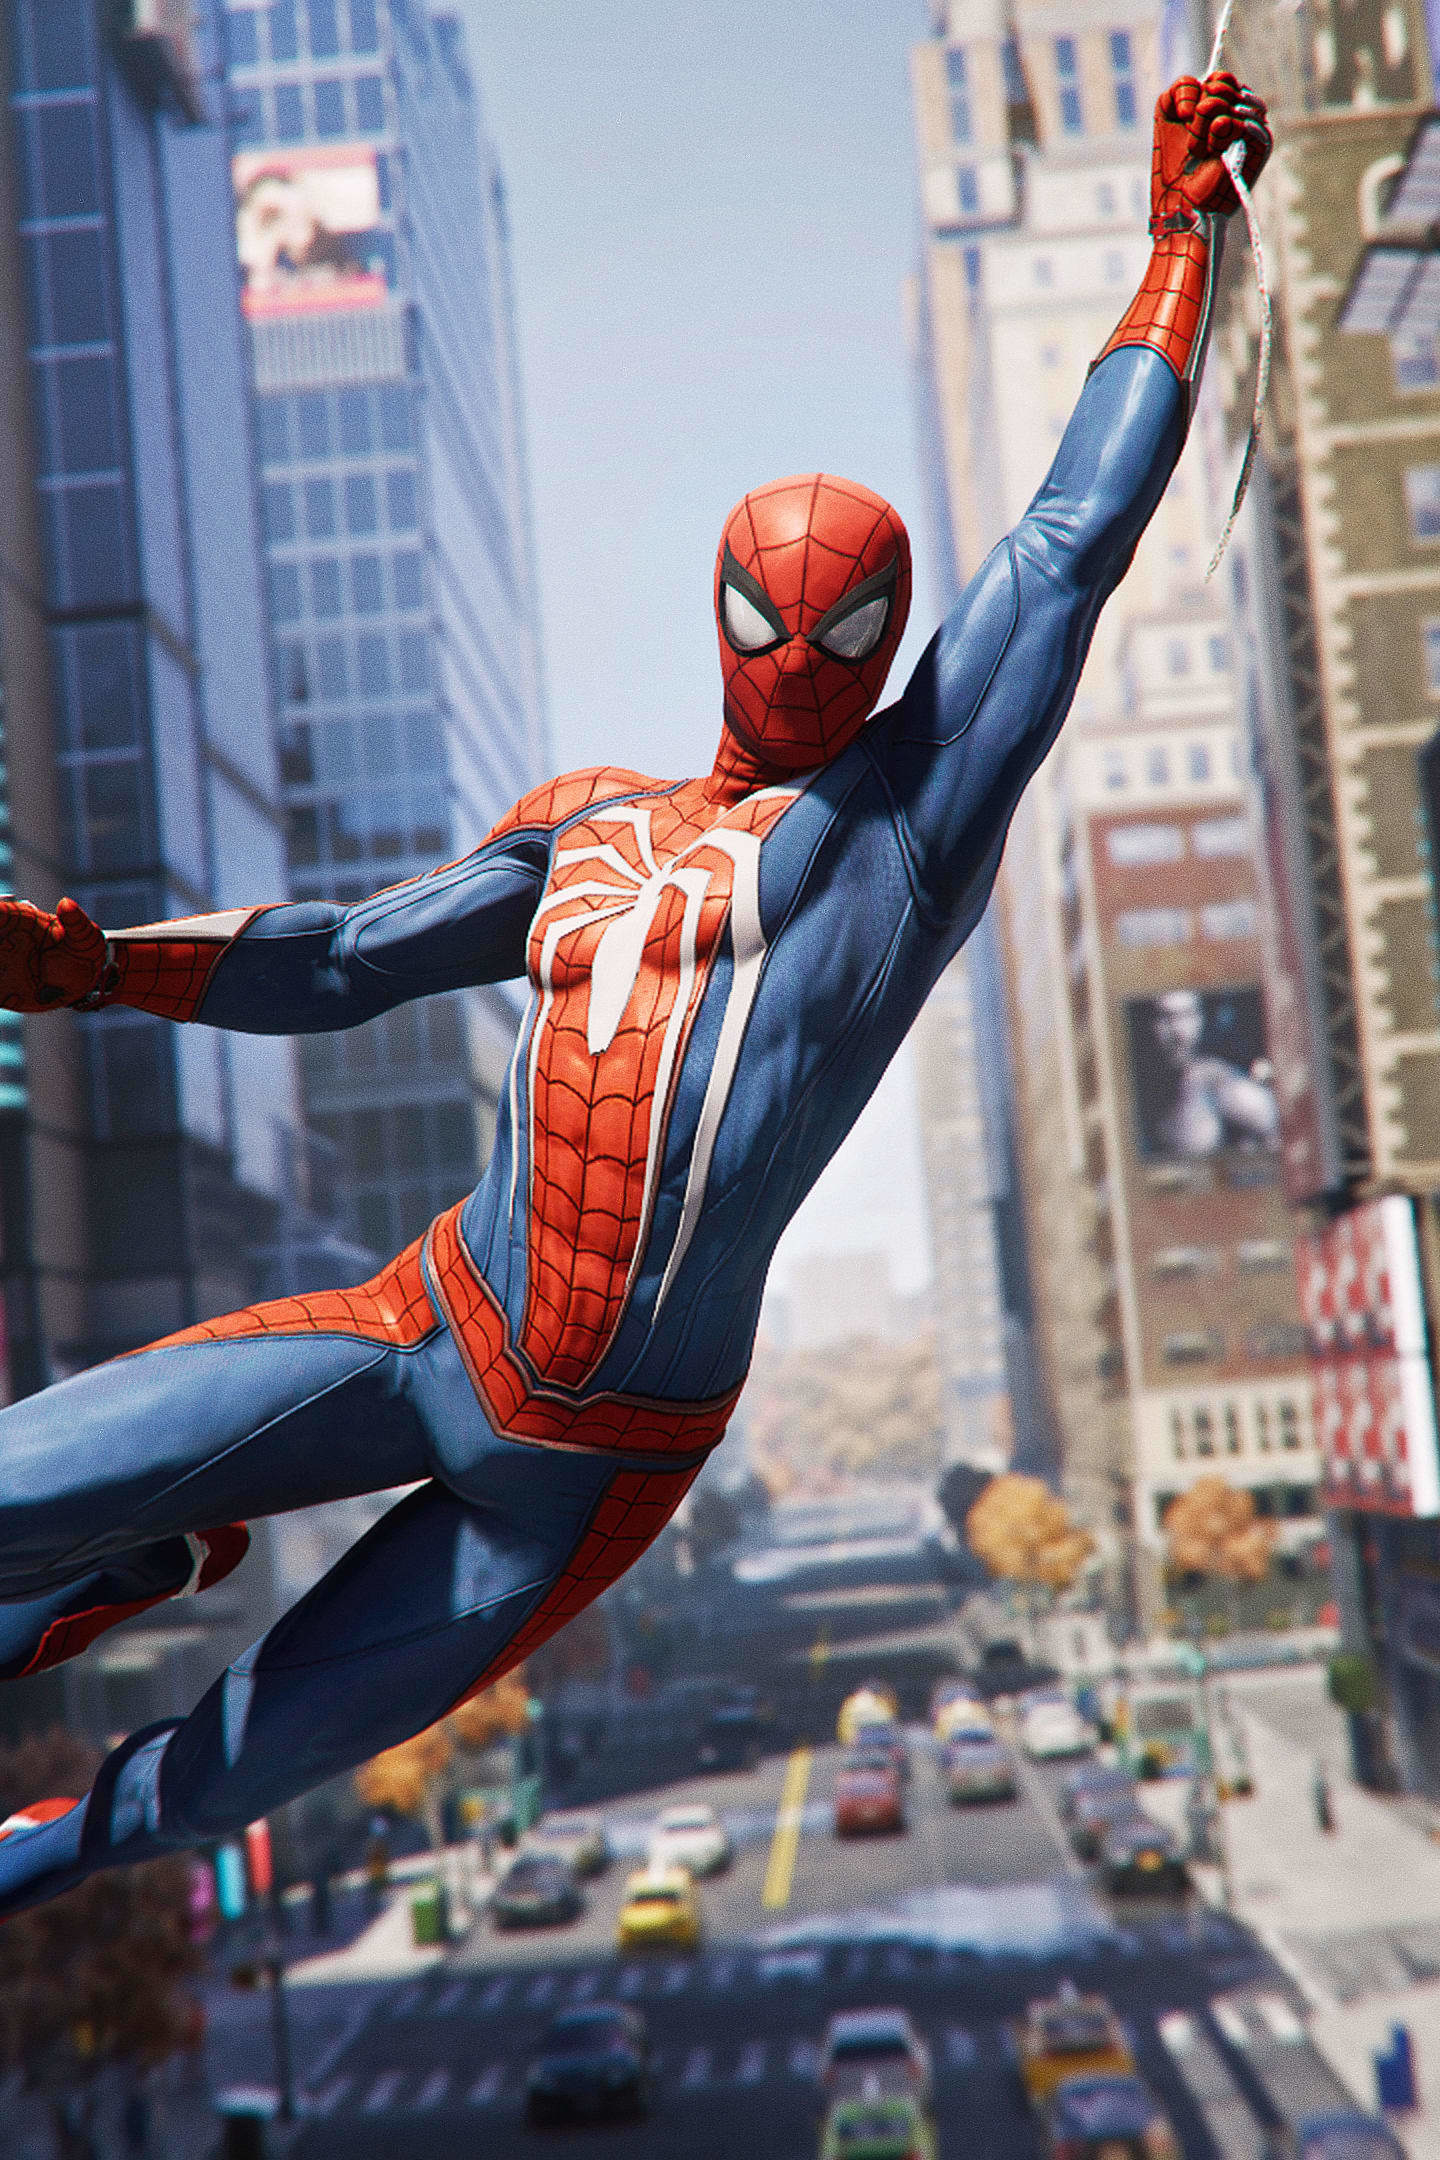 Download 1440x2880 Wallpaper Spider Man Ps4 Video Game